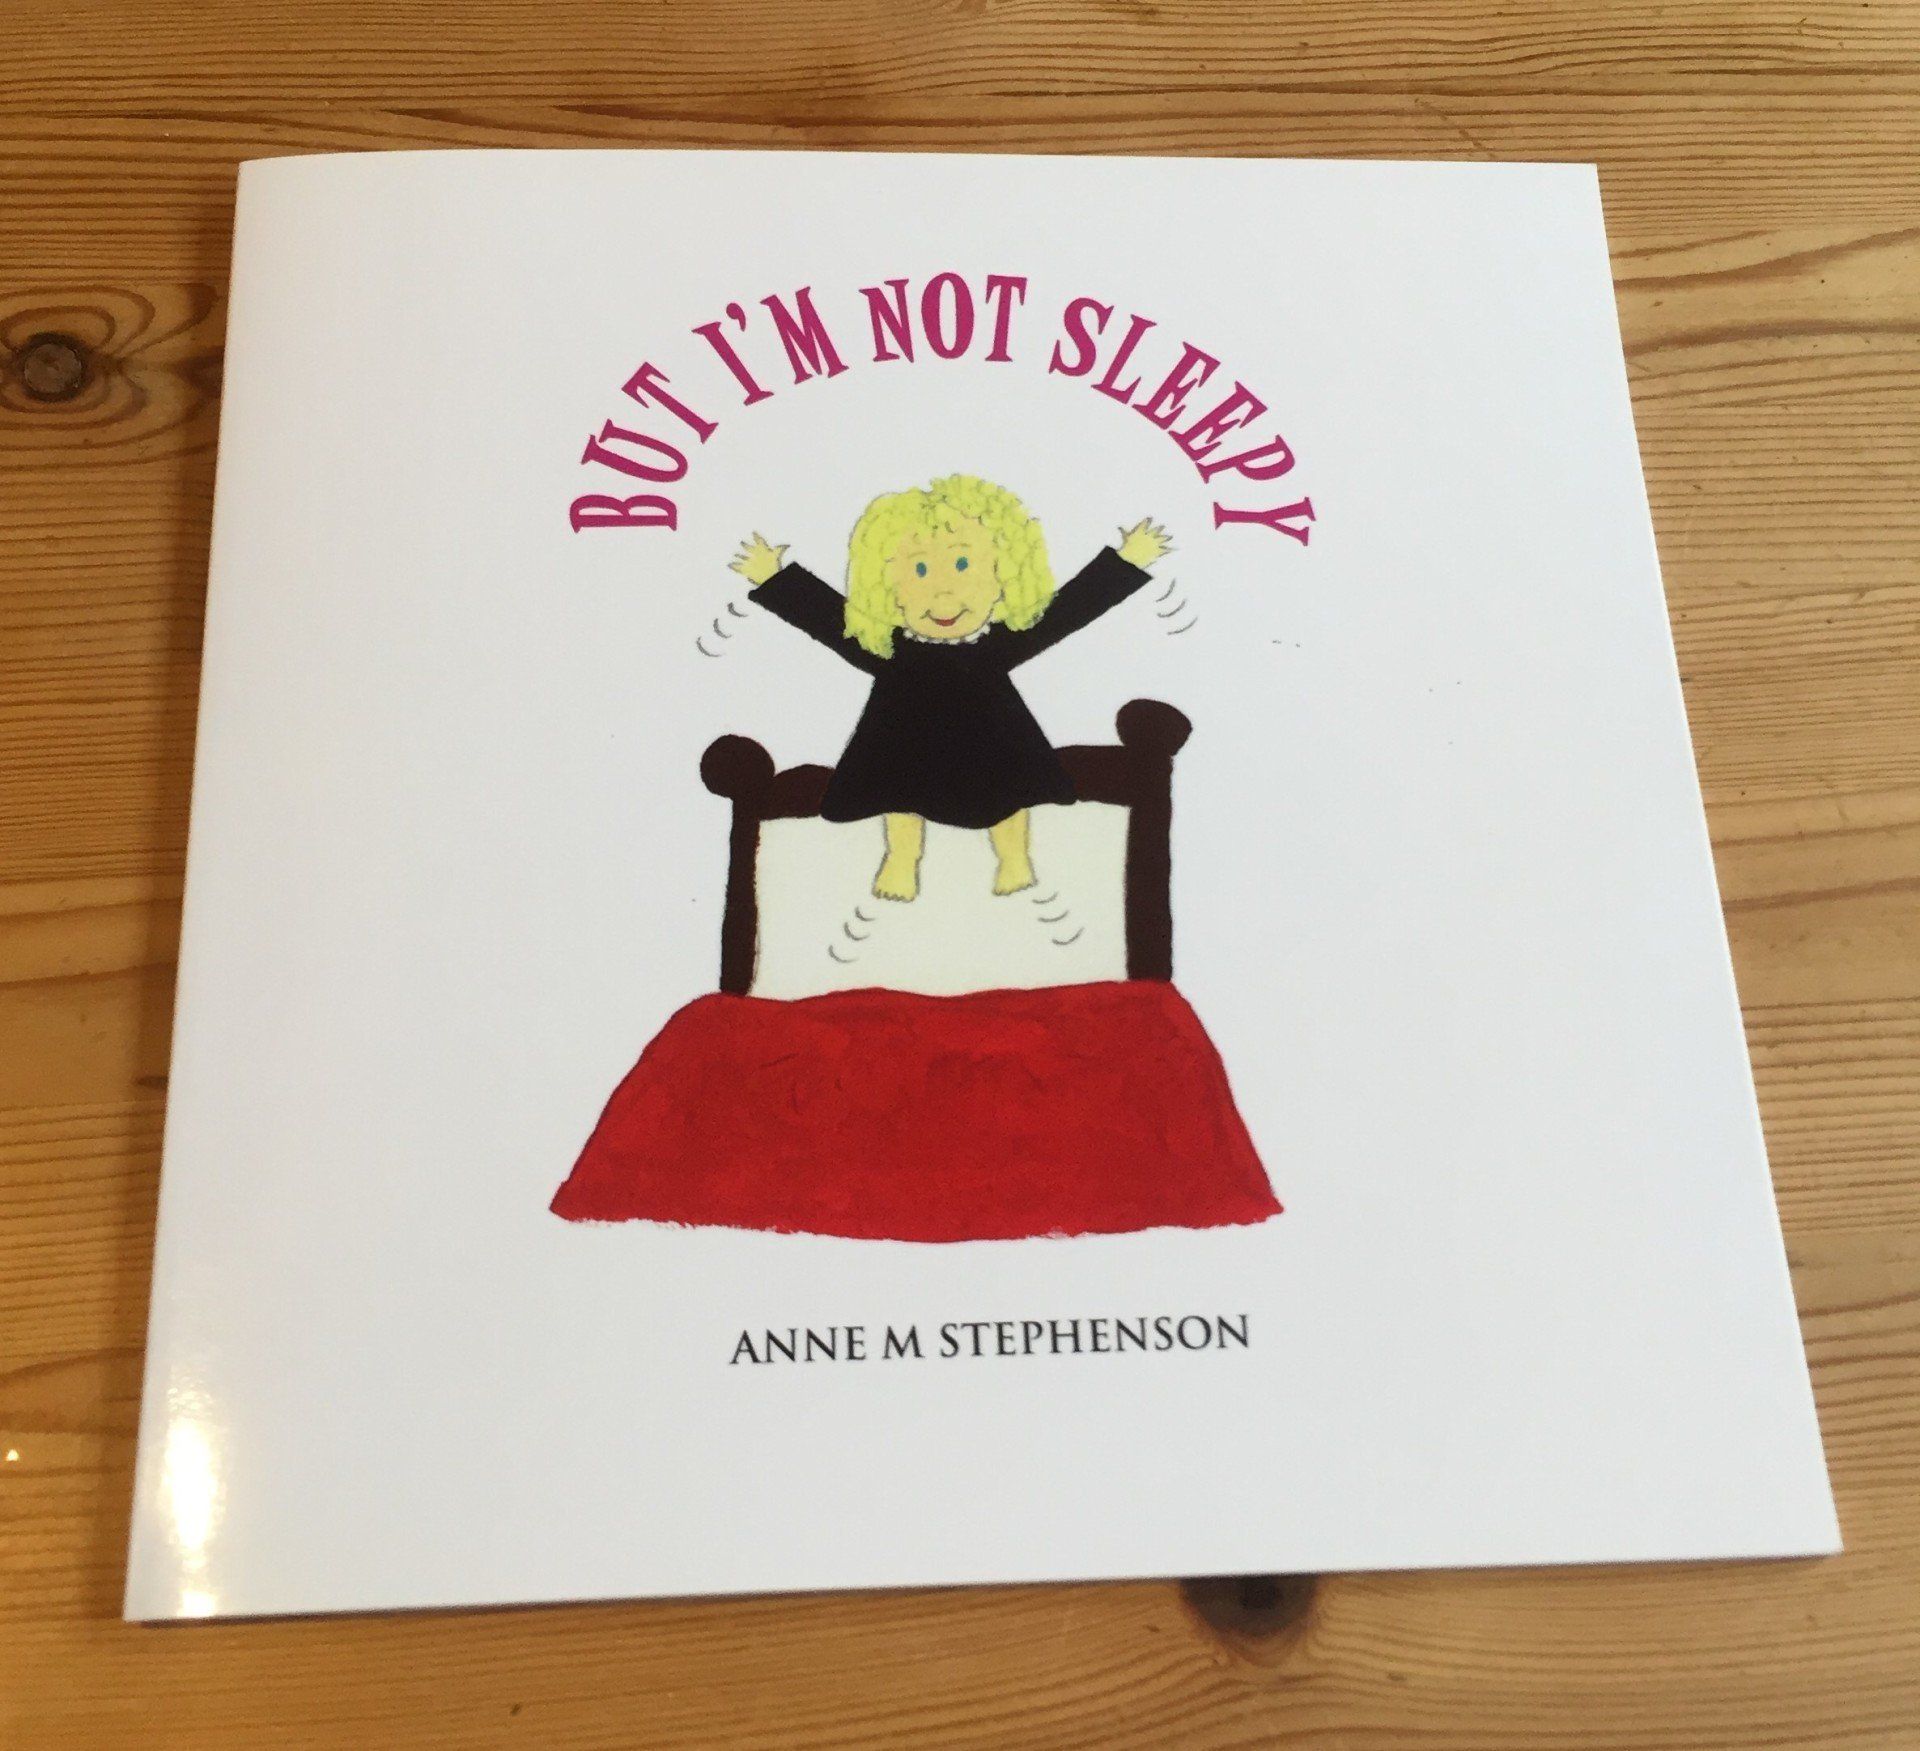 But I'm Not Sleepy book cover image